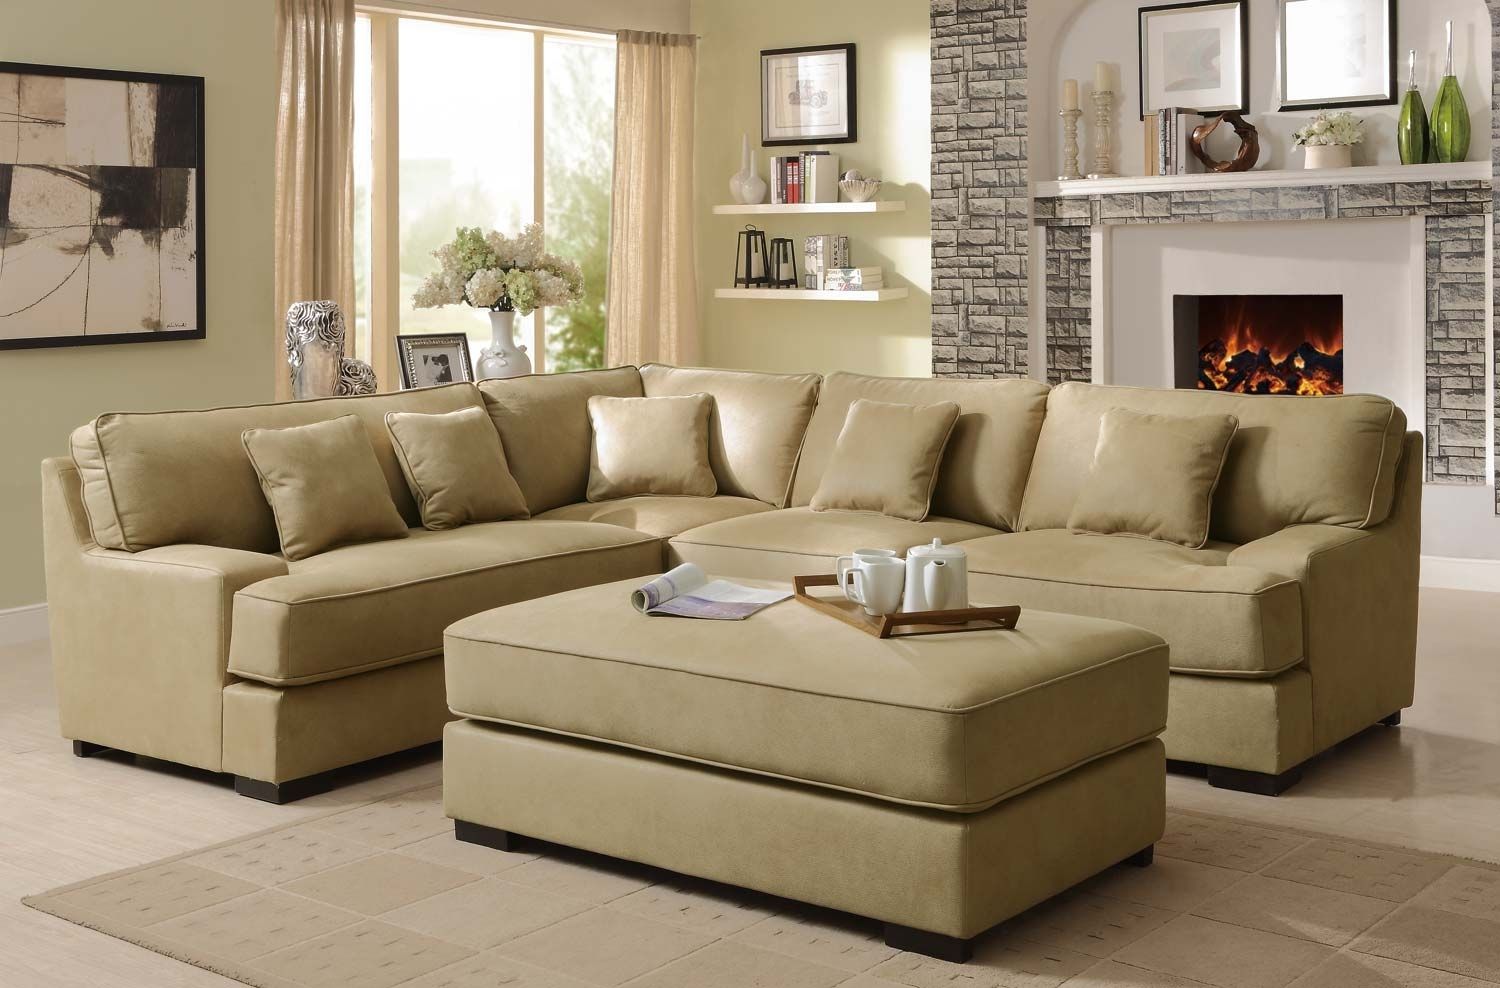 Sectional Sofa Design: Amazing Beige Sectional Sofas Beige Leather Throughout Beige Sectional Sofas (View 6 of 15)